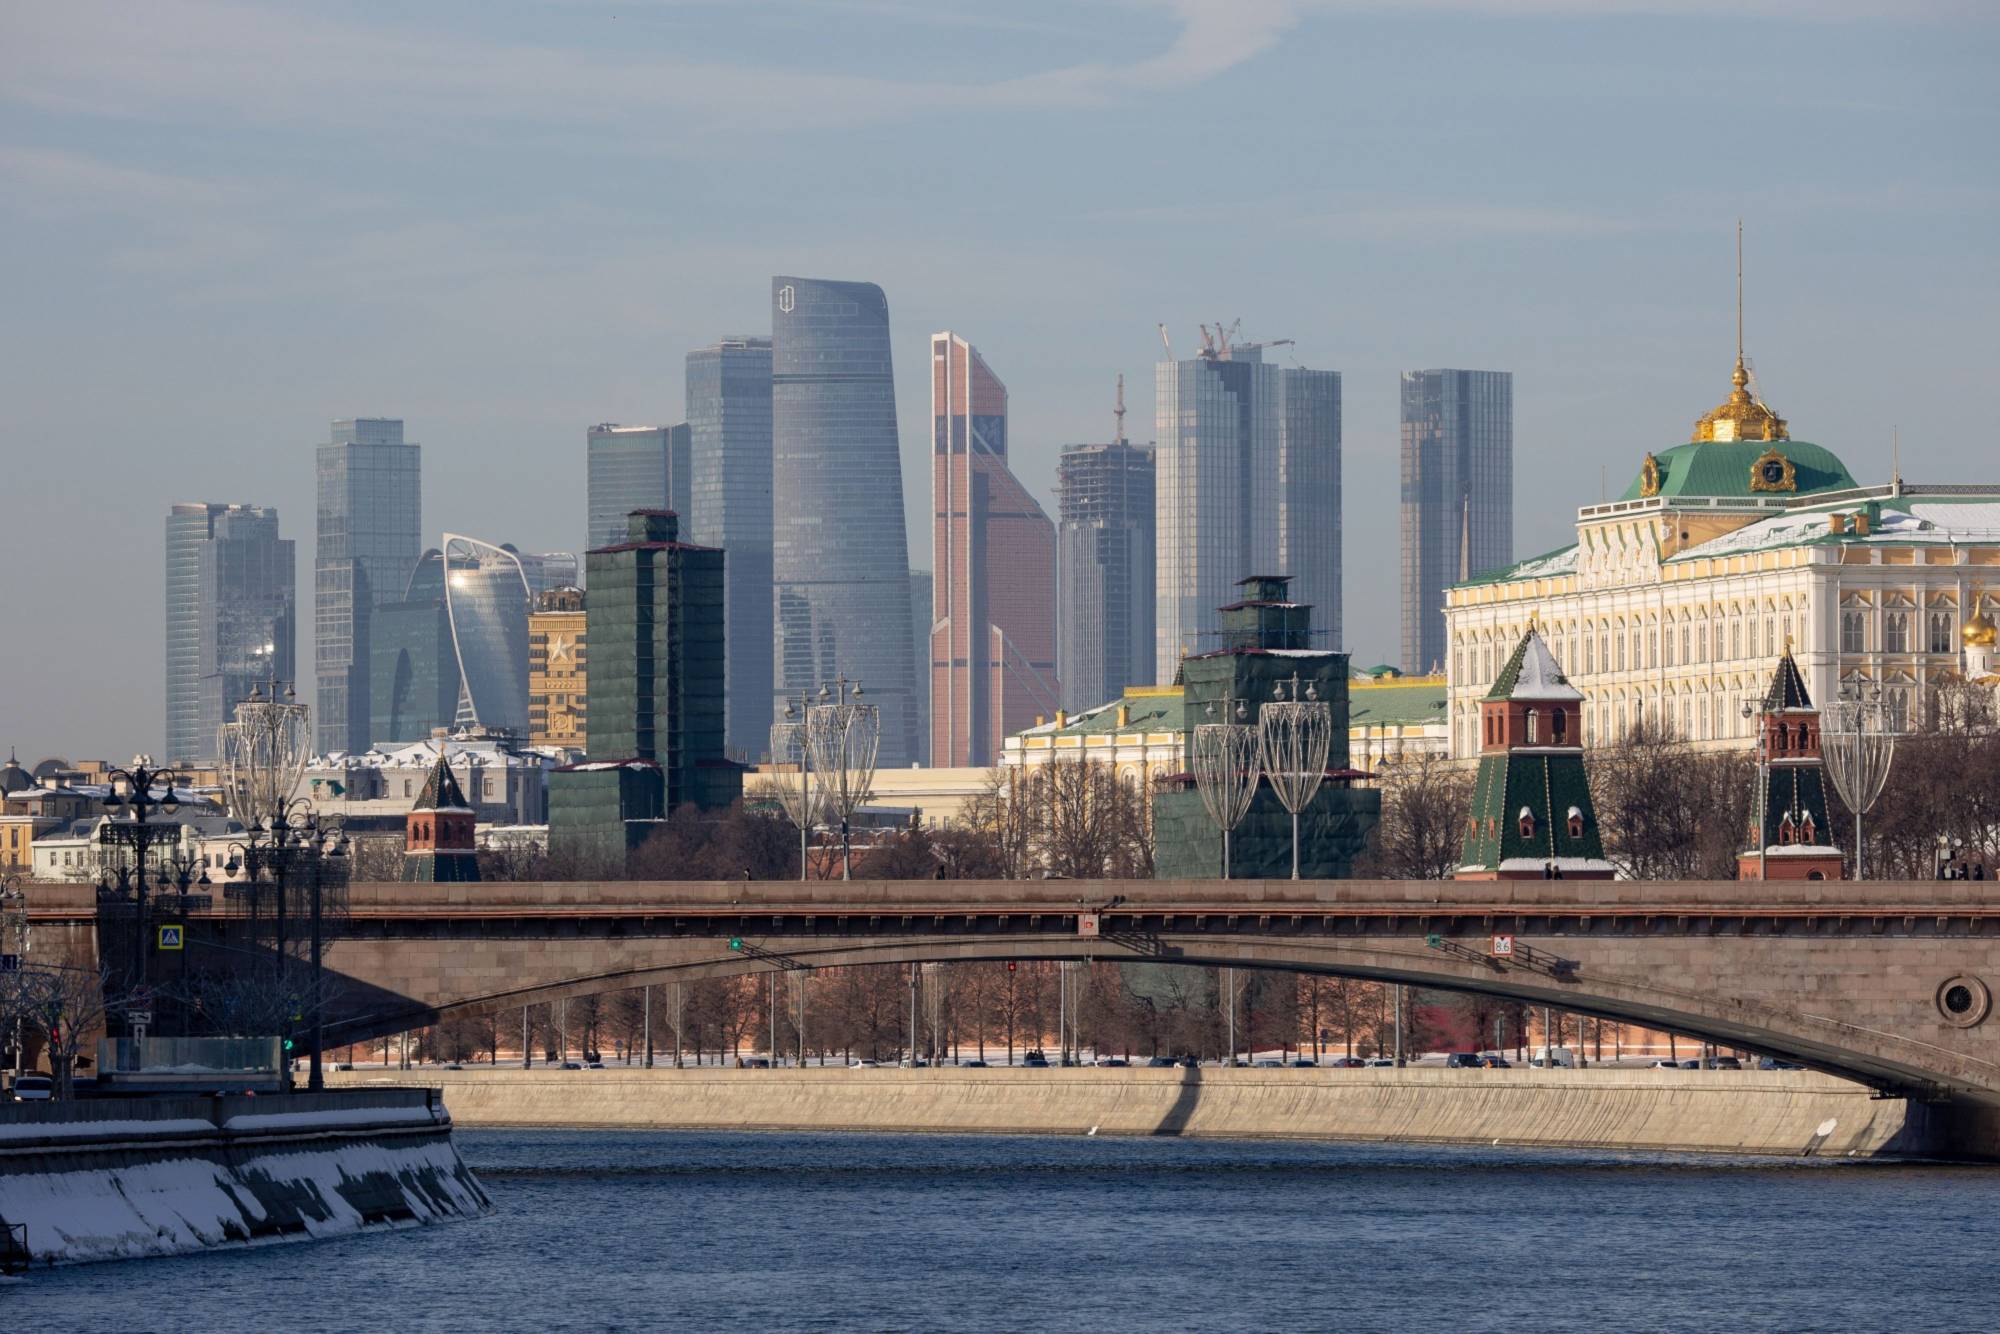 Skyscraper office buildings loom over the Moscow International Business Center (MIBC), also known as Moscow City, and the Grand Kremlin palace, right, as viewed from the River Moskva in Moscow on Feb. 15.  | BLOOMBERG